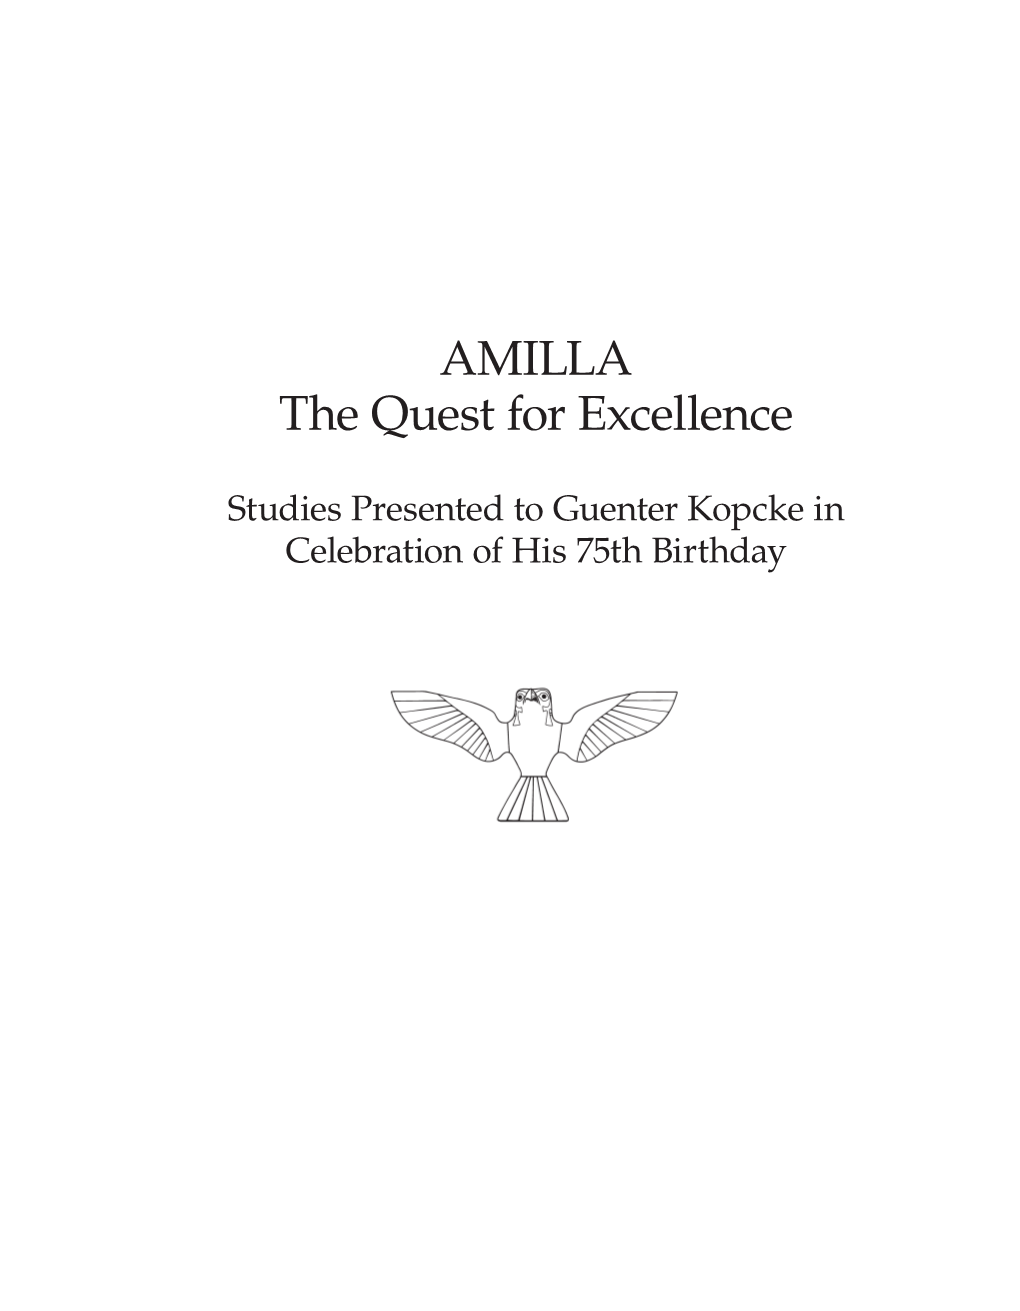 AMILLA the Quest for Excellence